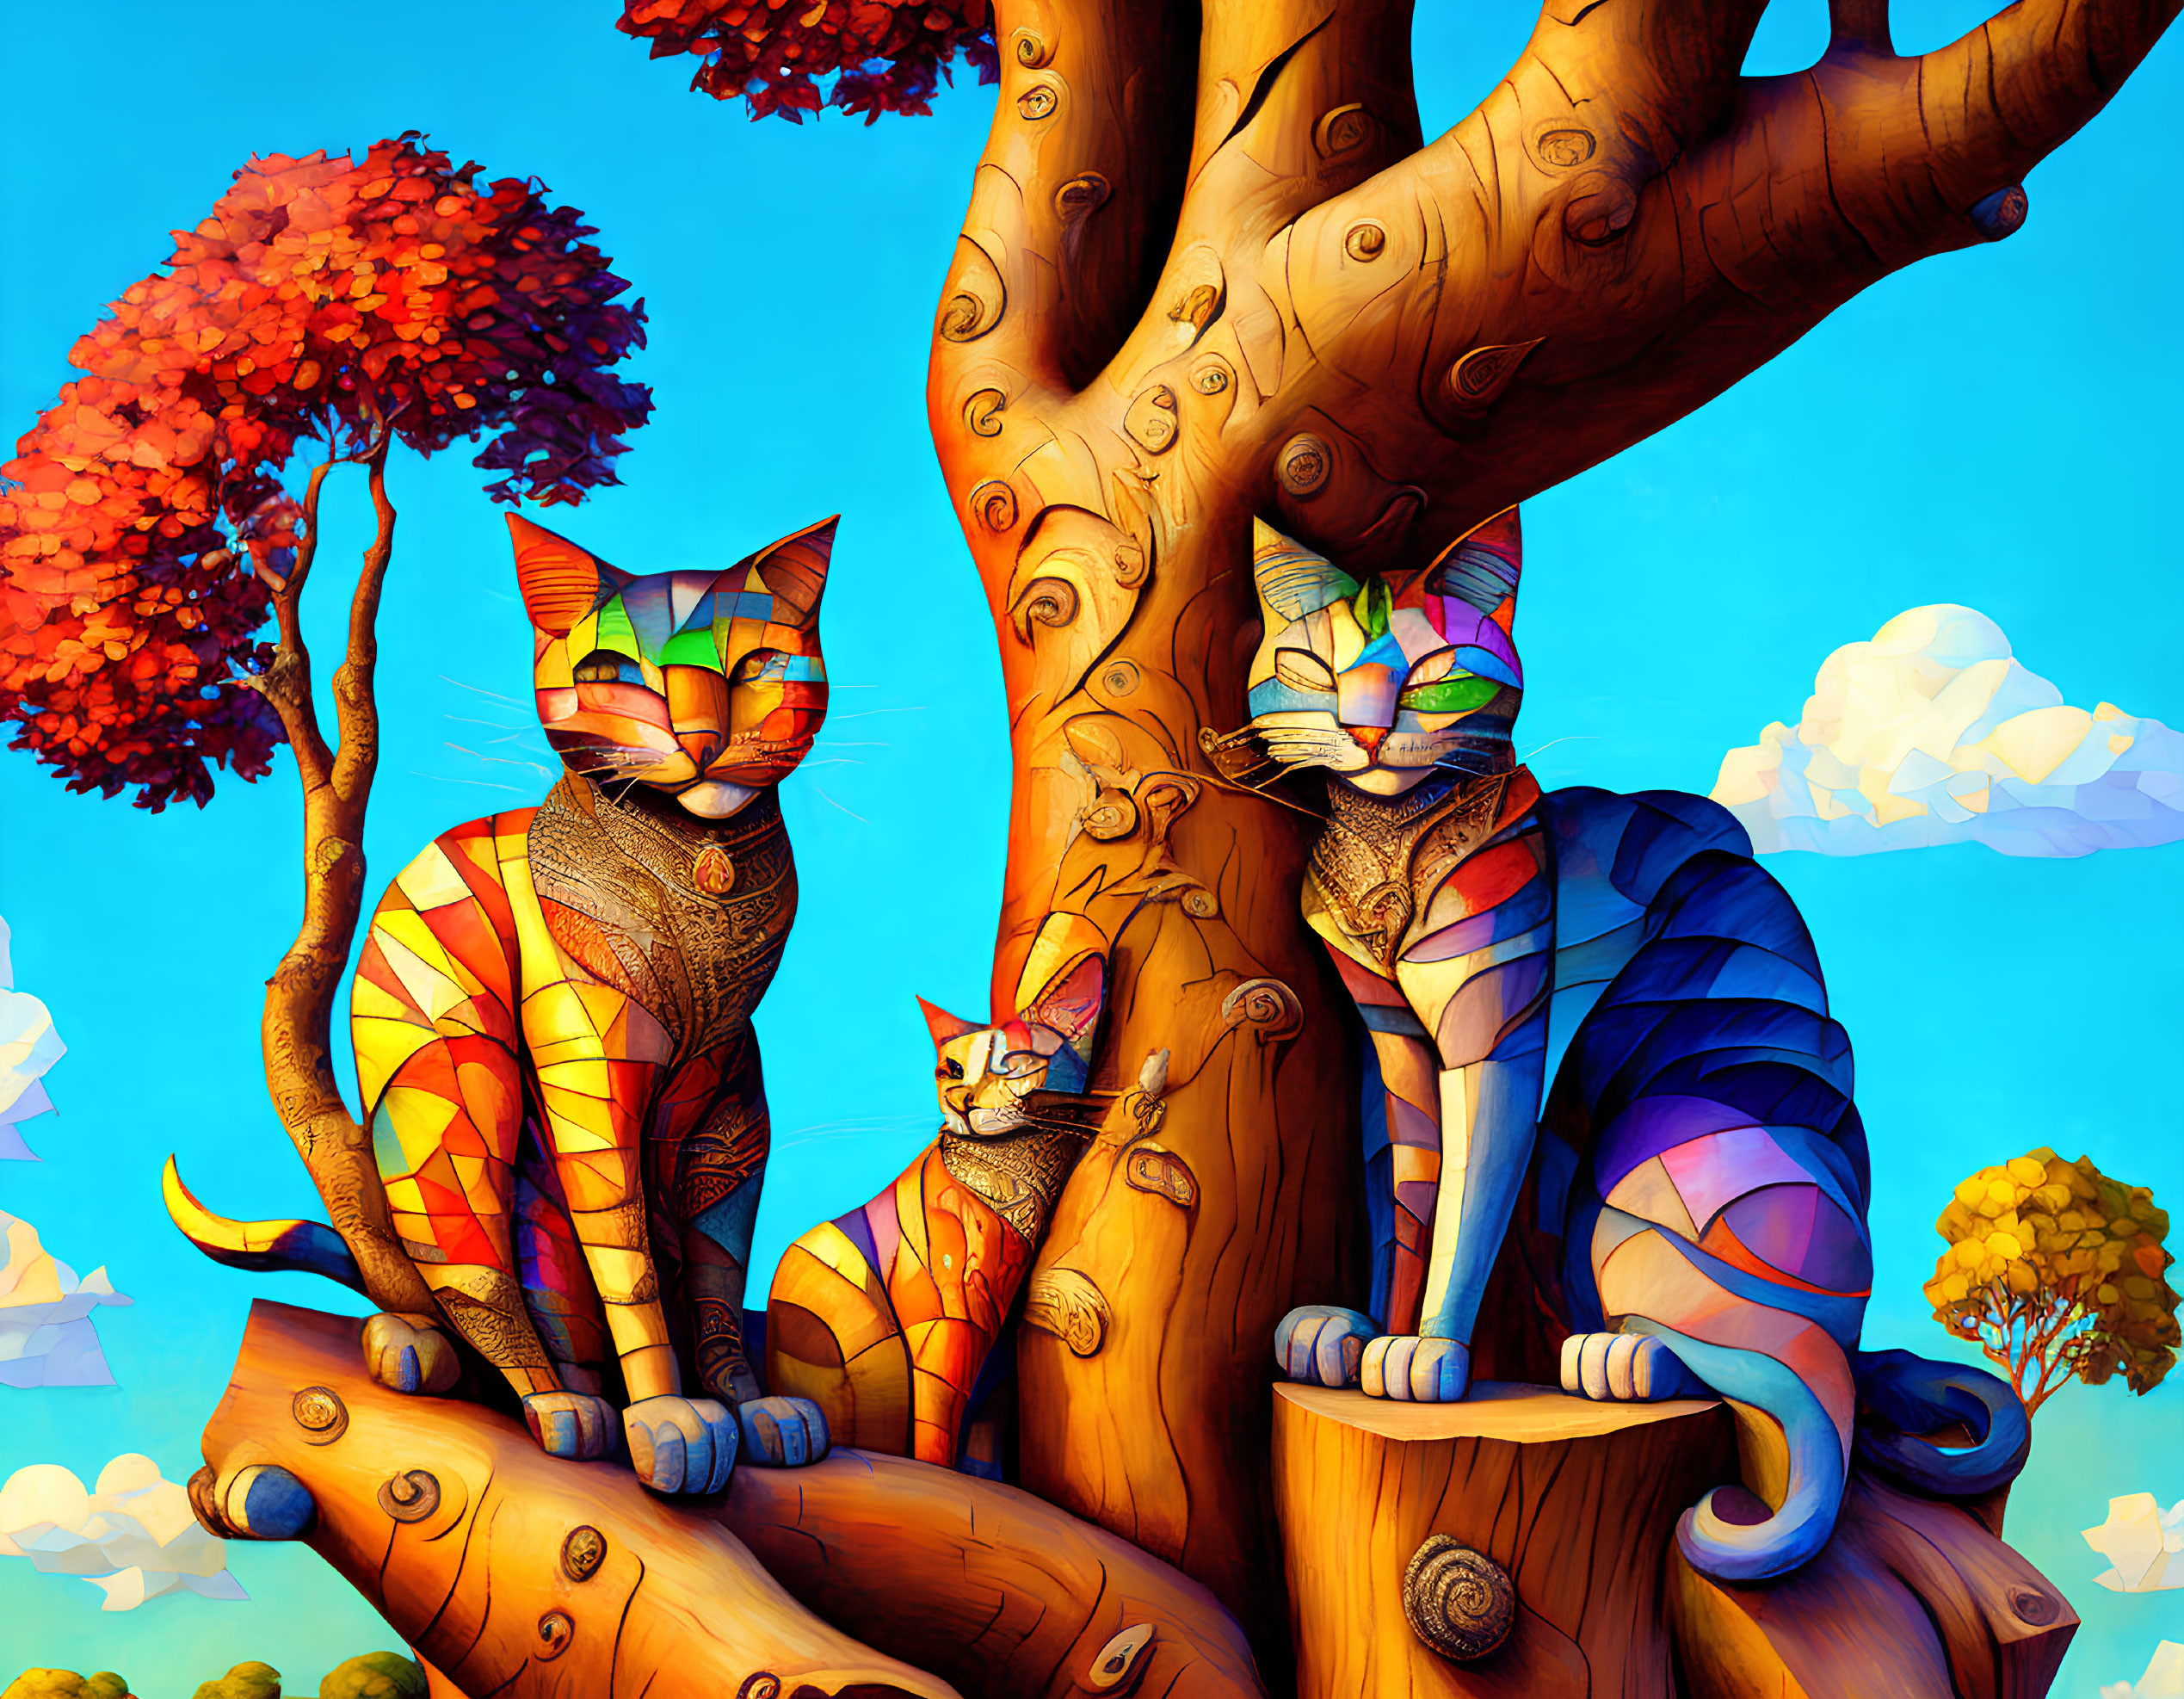 Colorful Patterned Cats in Tree Against Blue Sky with Clouds & Autumn Tree